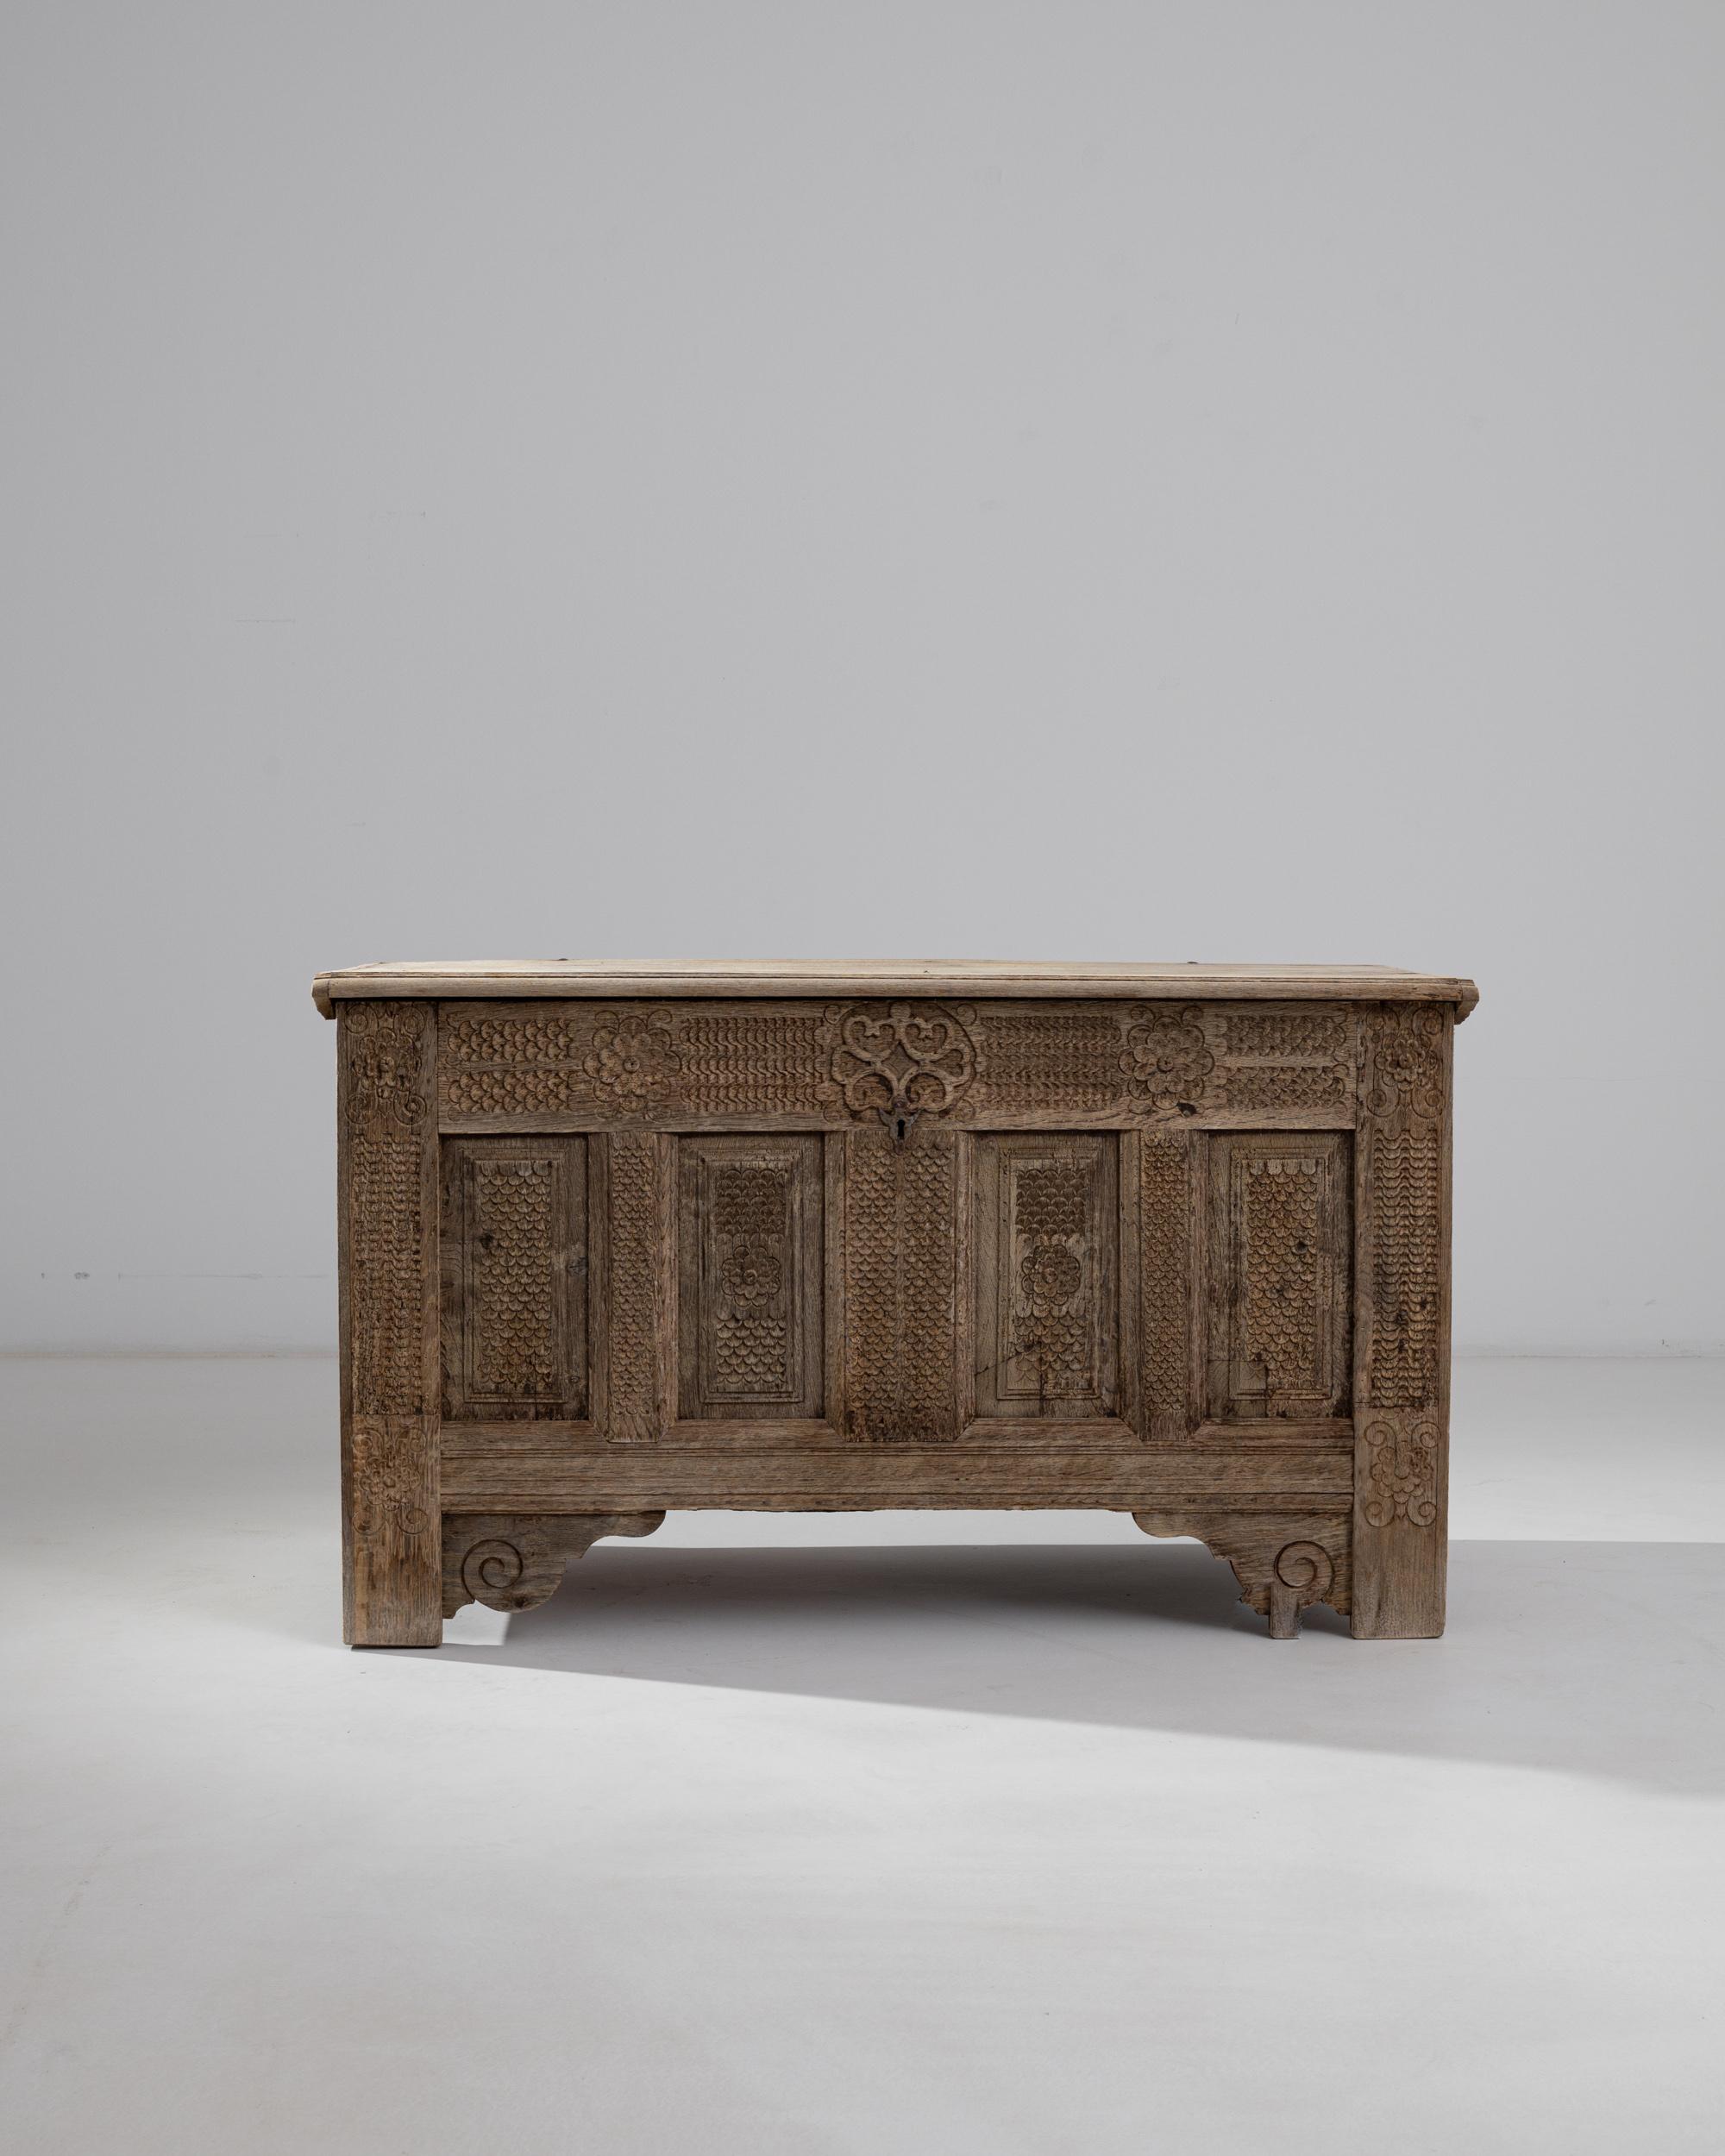 Detailed carving gives this antique gothic trunk a rich optical quality. Made in Germany in the 18th century, the form of the oak chest is simple, set upon sturdy plank-like legs. The solid slab of the lid opens upon original iron hinges, while